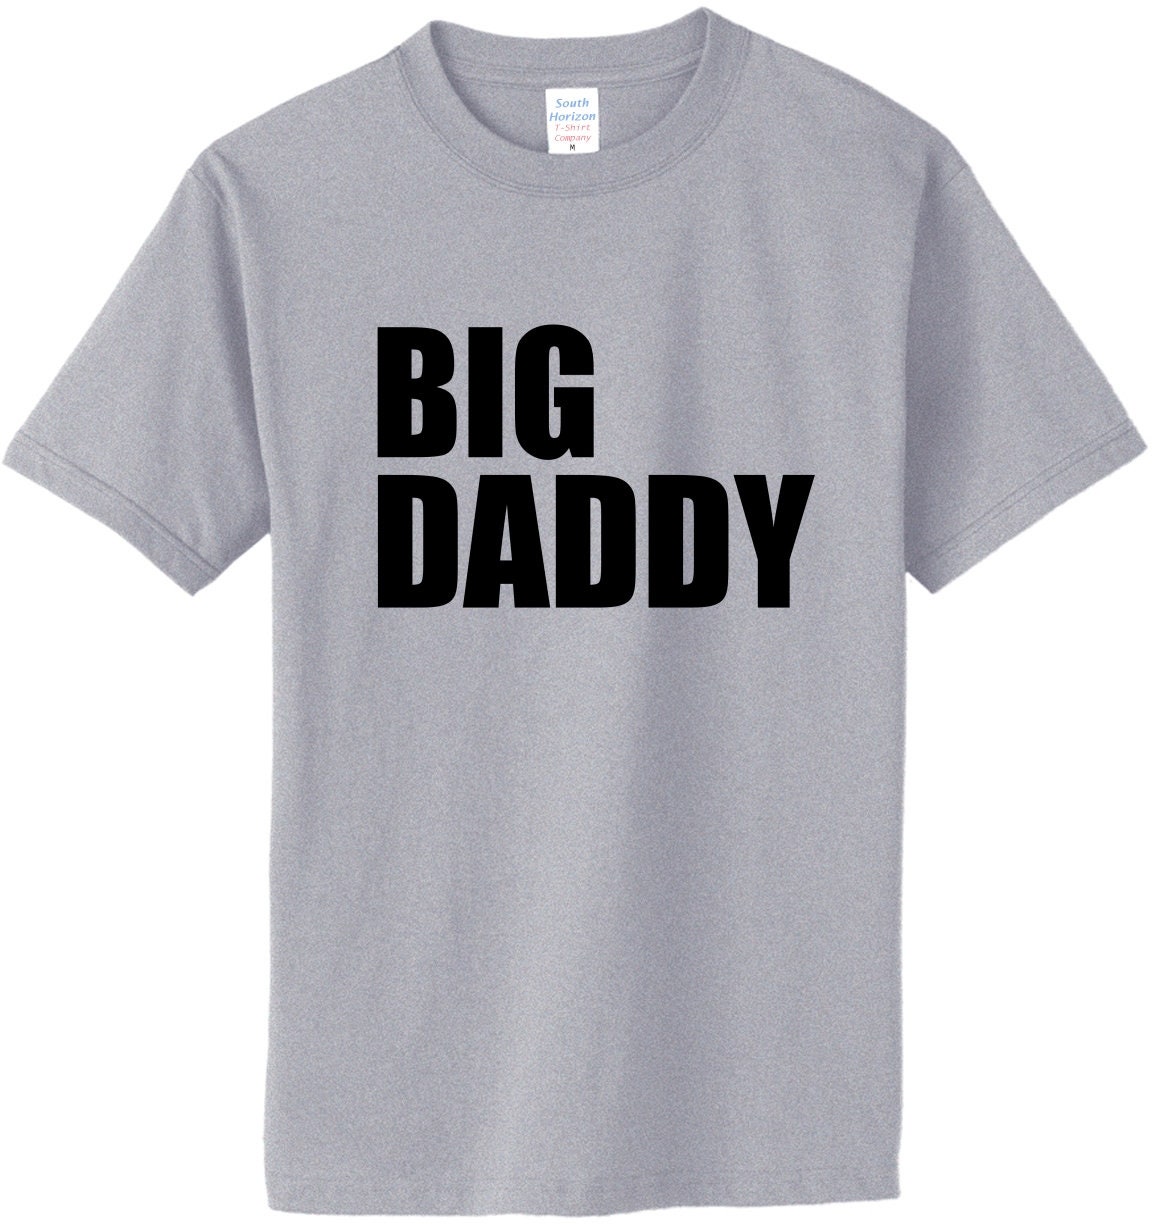 BIG DADDY T-shirt in sizes up to 6XL Fast Shipping | Etsy